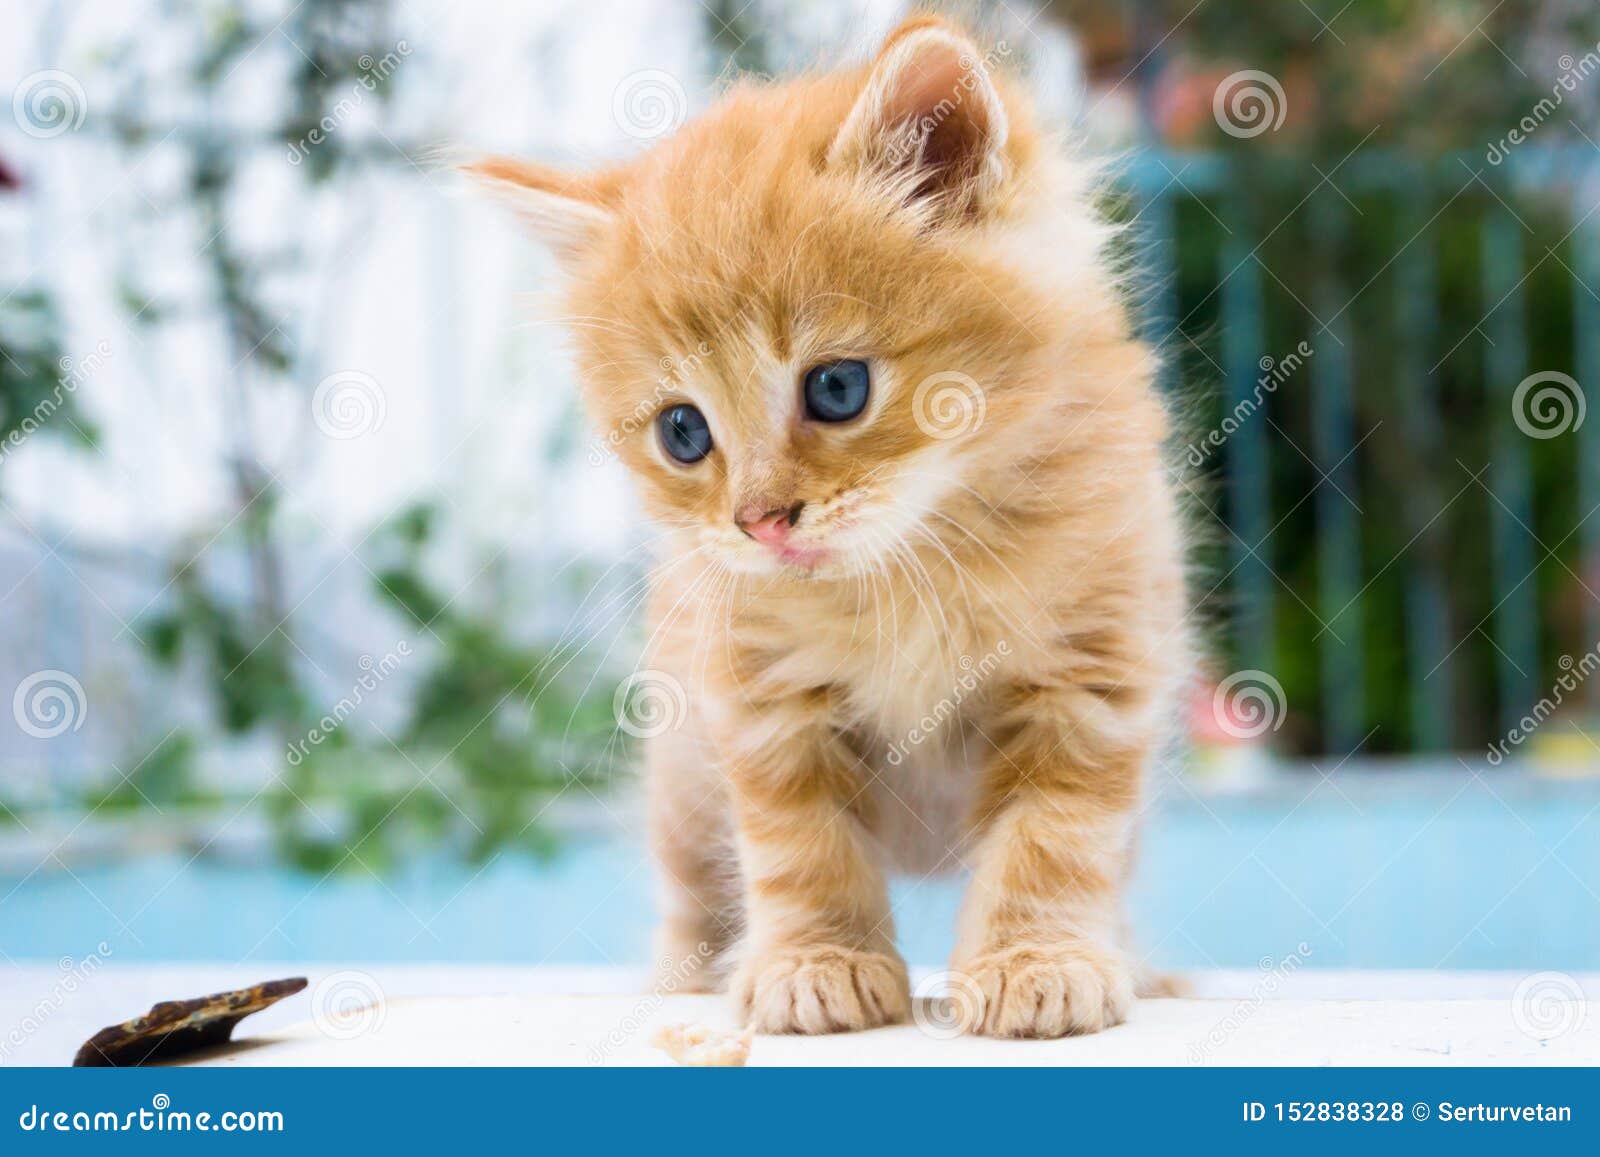 195 026 Kitten Tabby Photos Free Royalty Free Stock Photos From Dreamstime